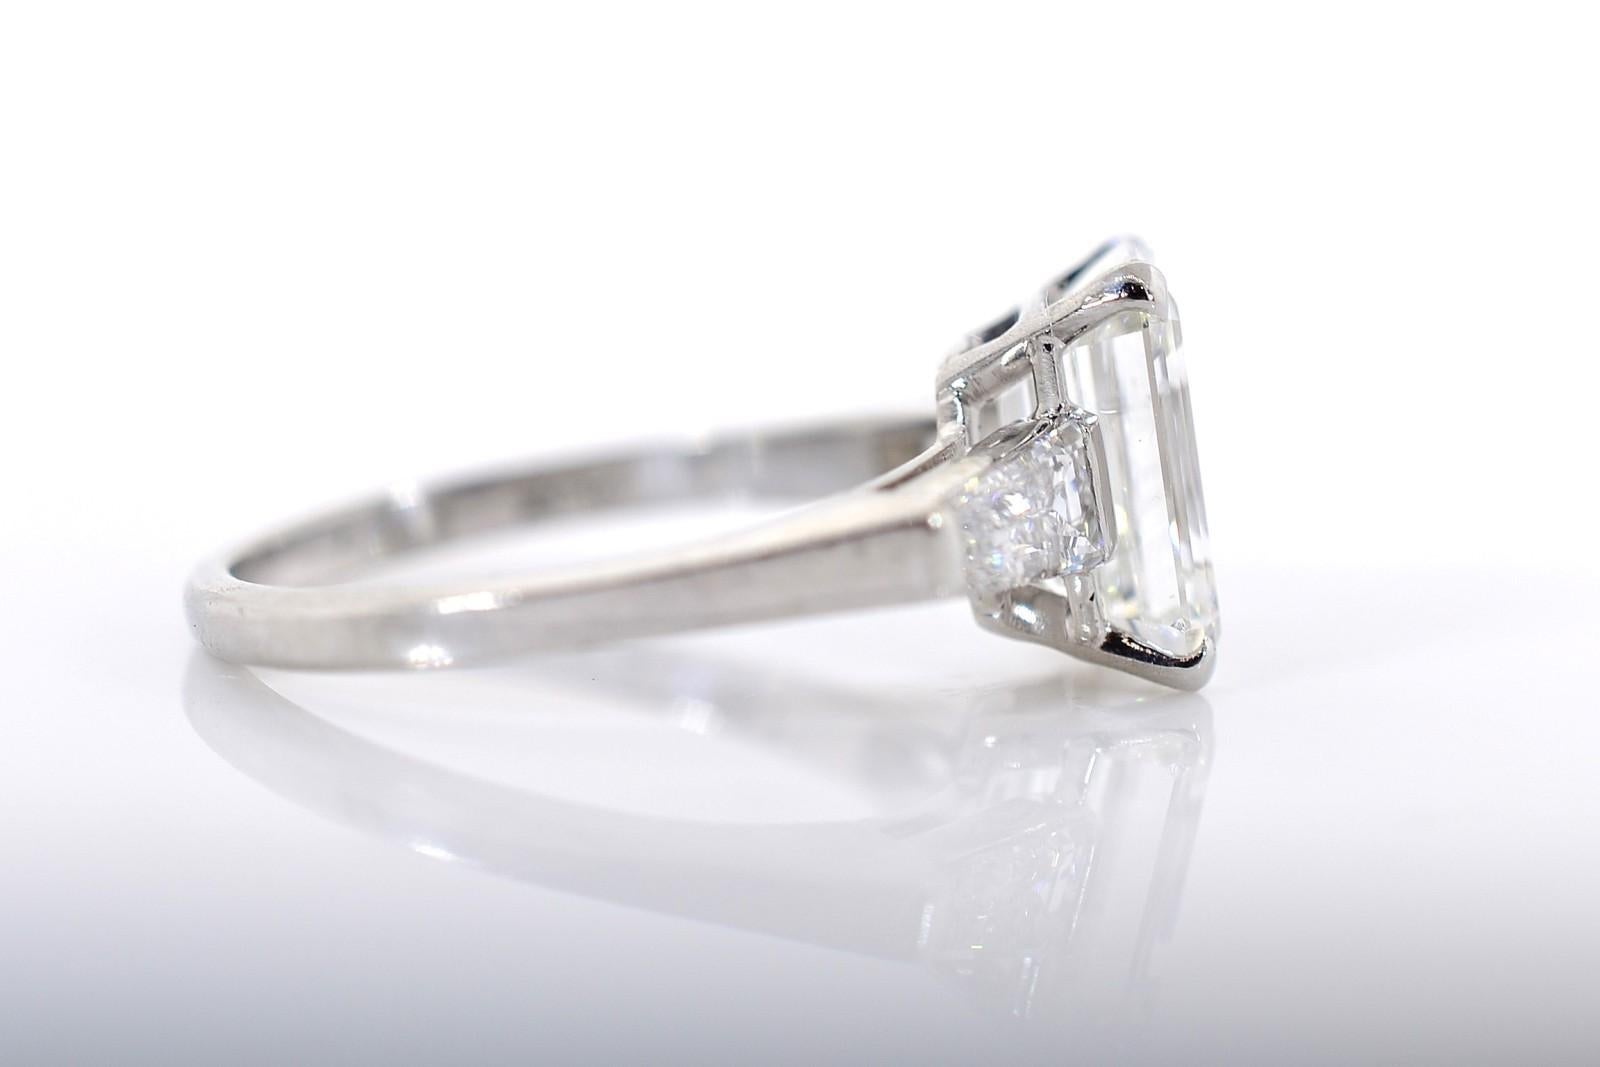 A sparkling 2.23 carat Emerald cut Diamond highlights this classic 1950's platinum beauty.  Two brilliant tapered Baguette Diamonds lead our eyes to the G.I.A. certified (2205876771) F color - VS2 clarity centerpiece.  The low profile ring setting